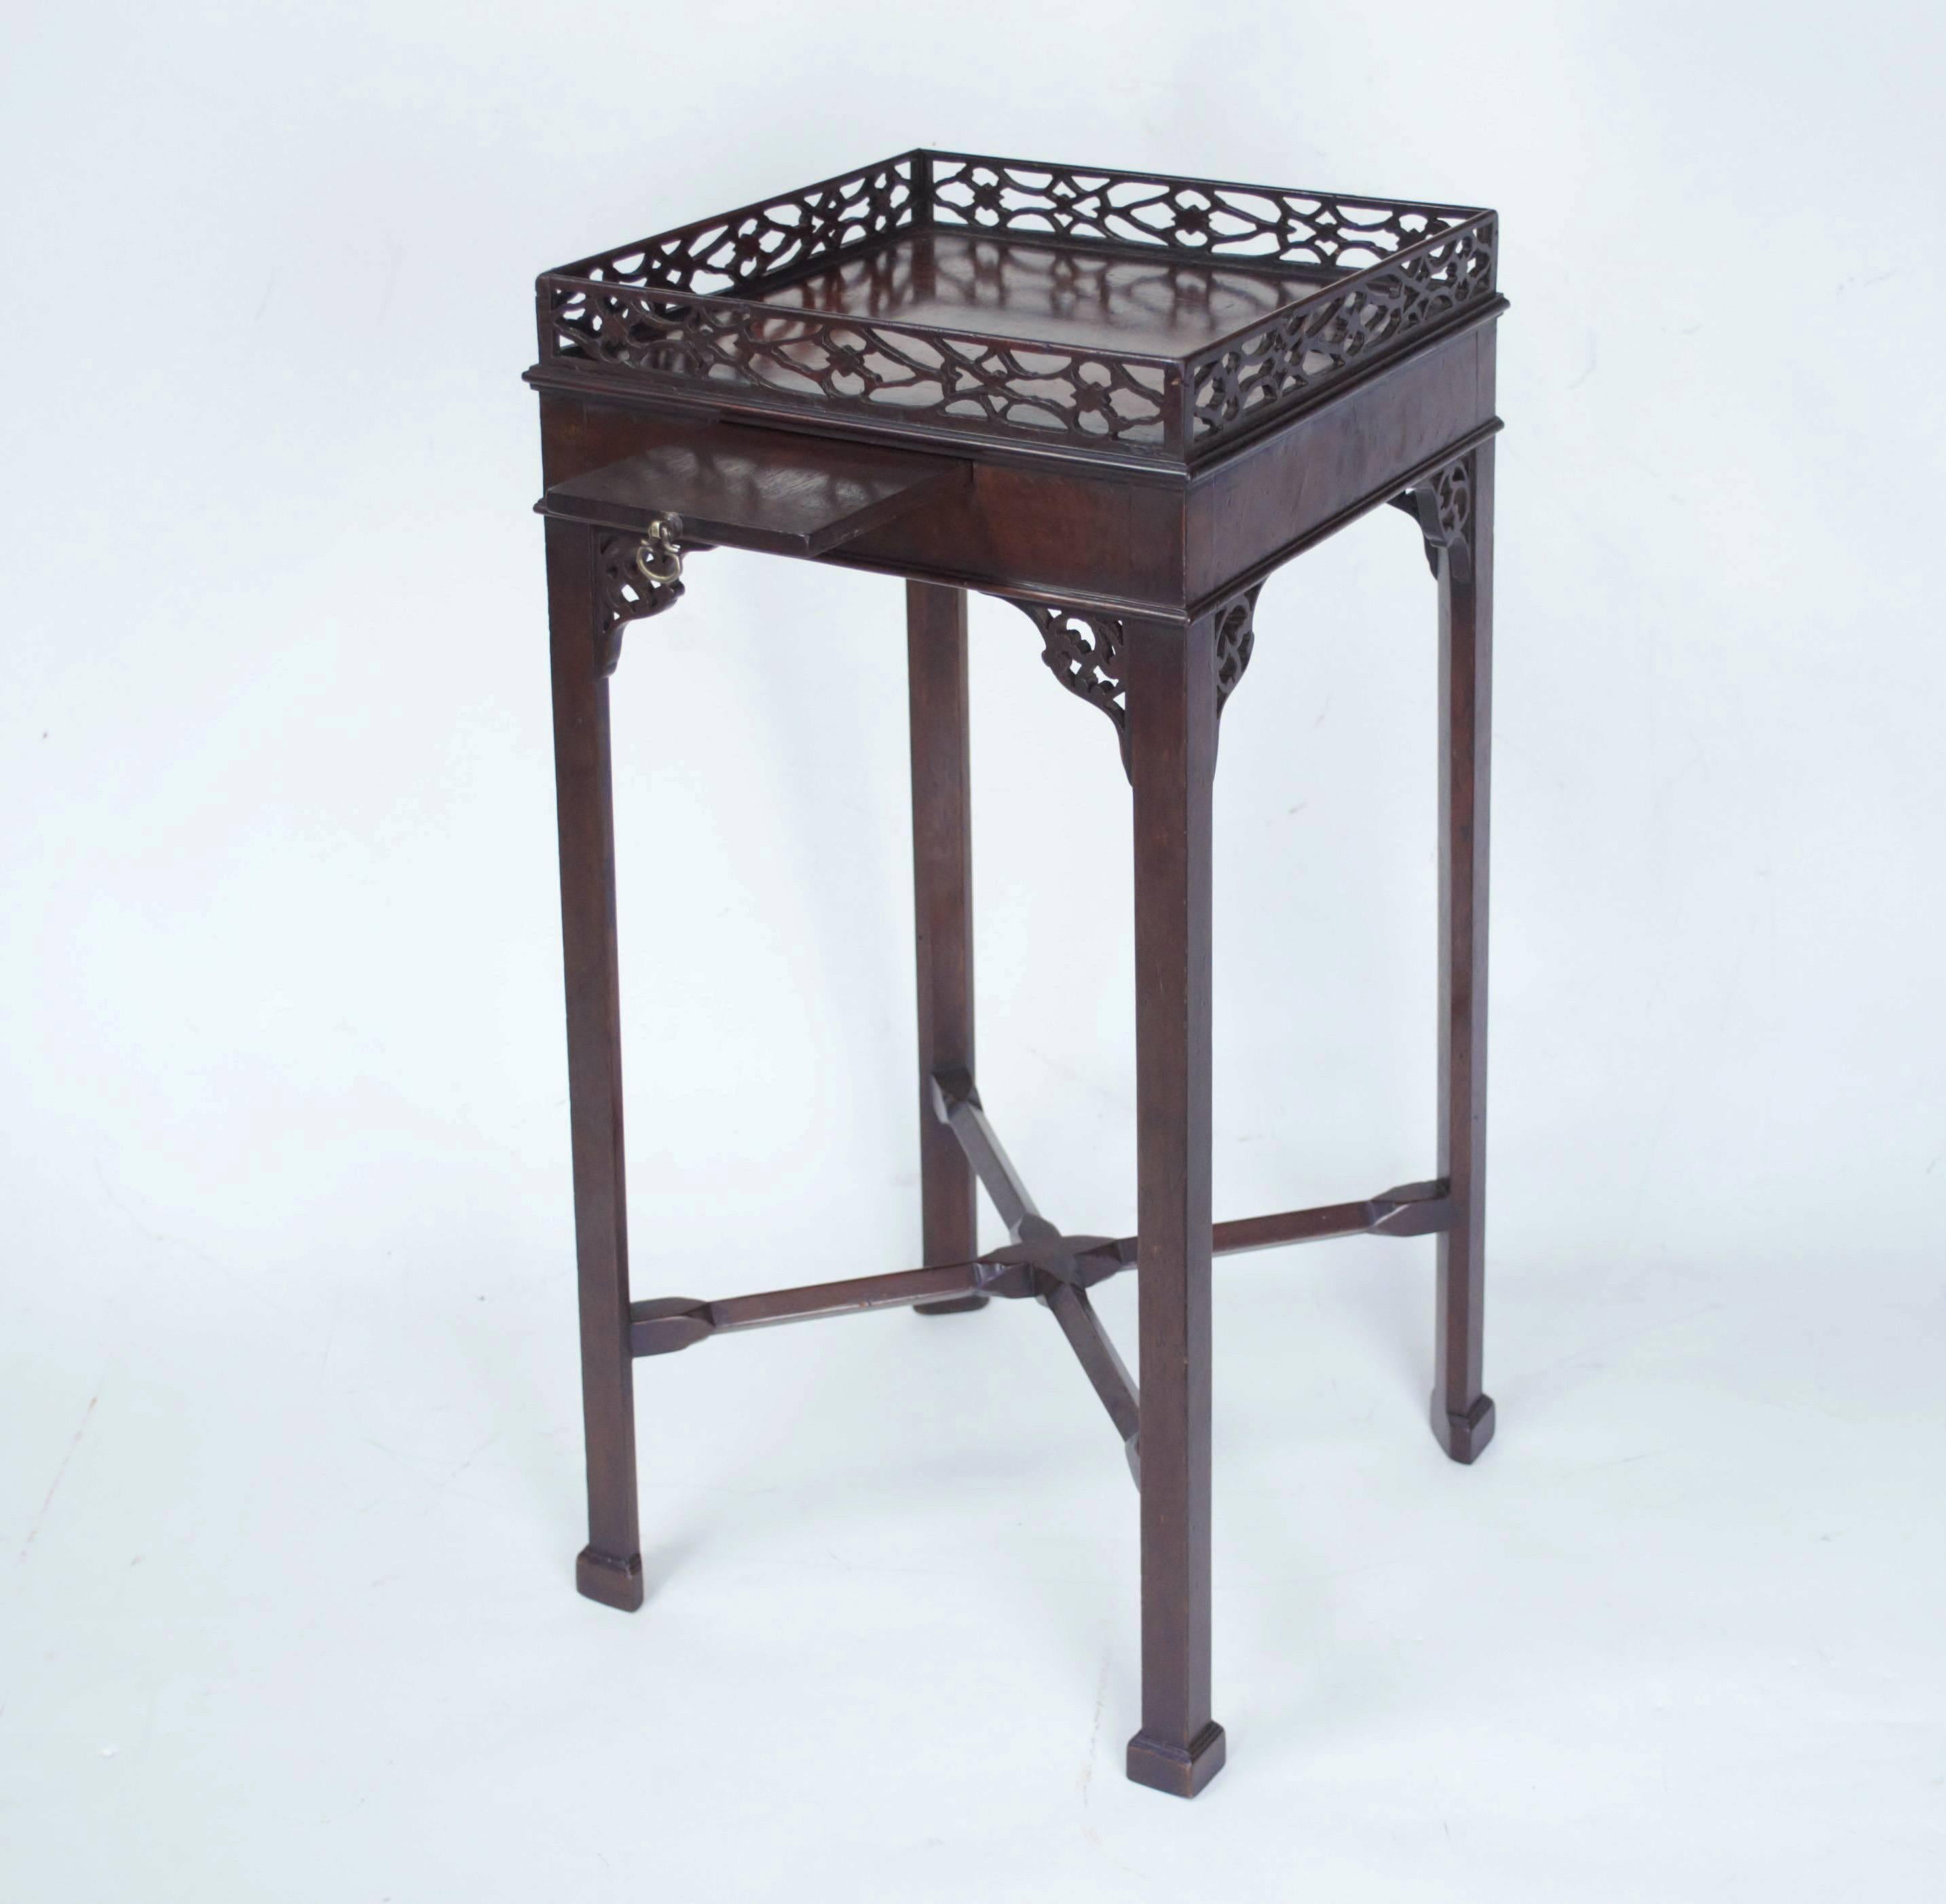 A fine quality Chippendale inspired mahogany urn or kettle stand of square form with open-fret galleried top above a moulded edged apron set with a cup slide in the front, and standing on elegant and unusual triangular legs with block toes and